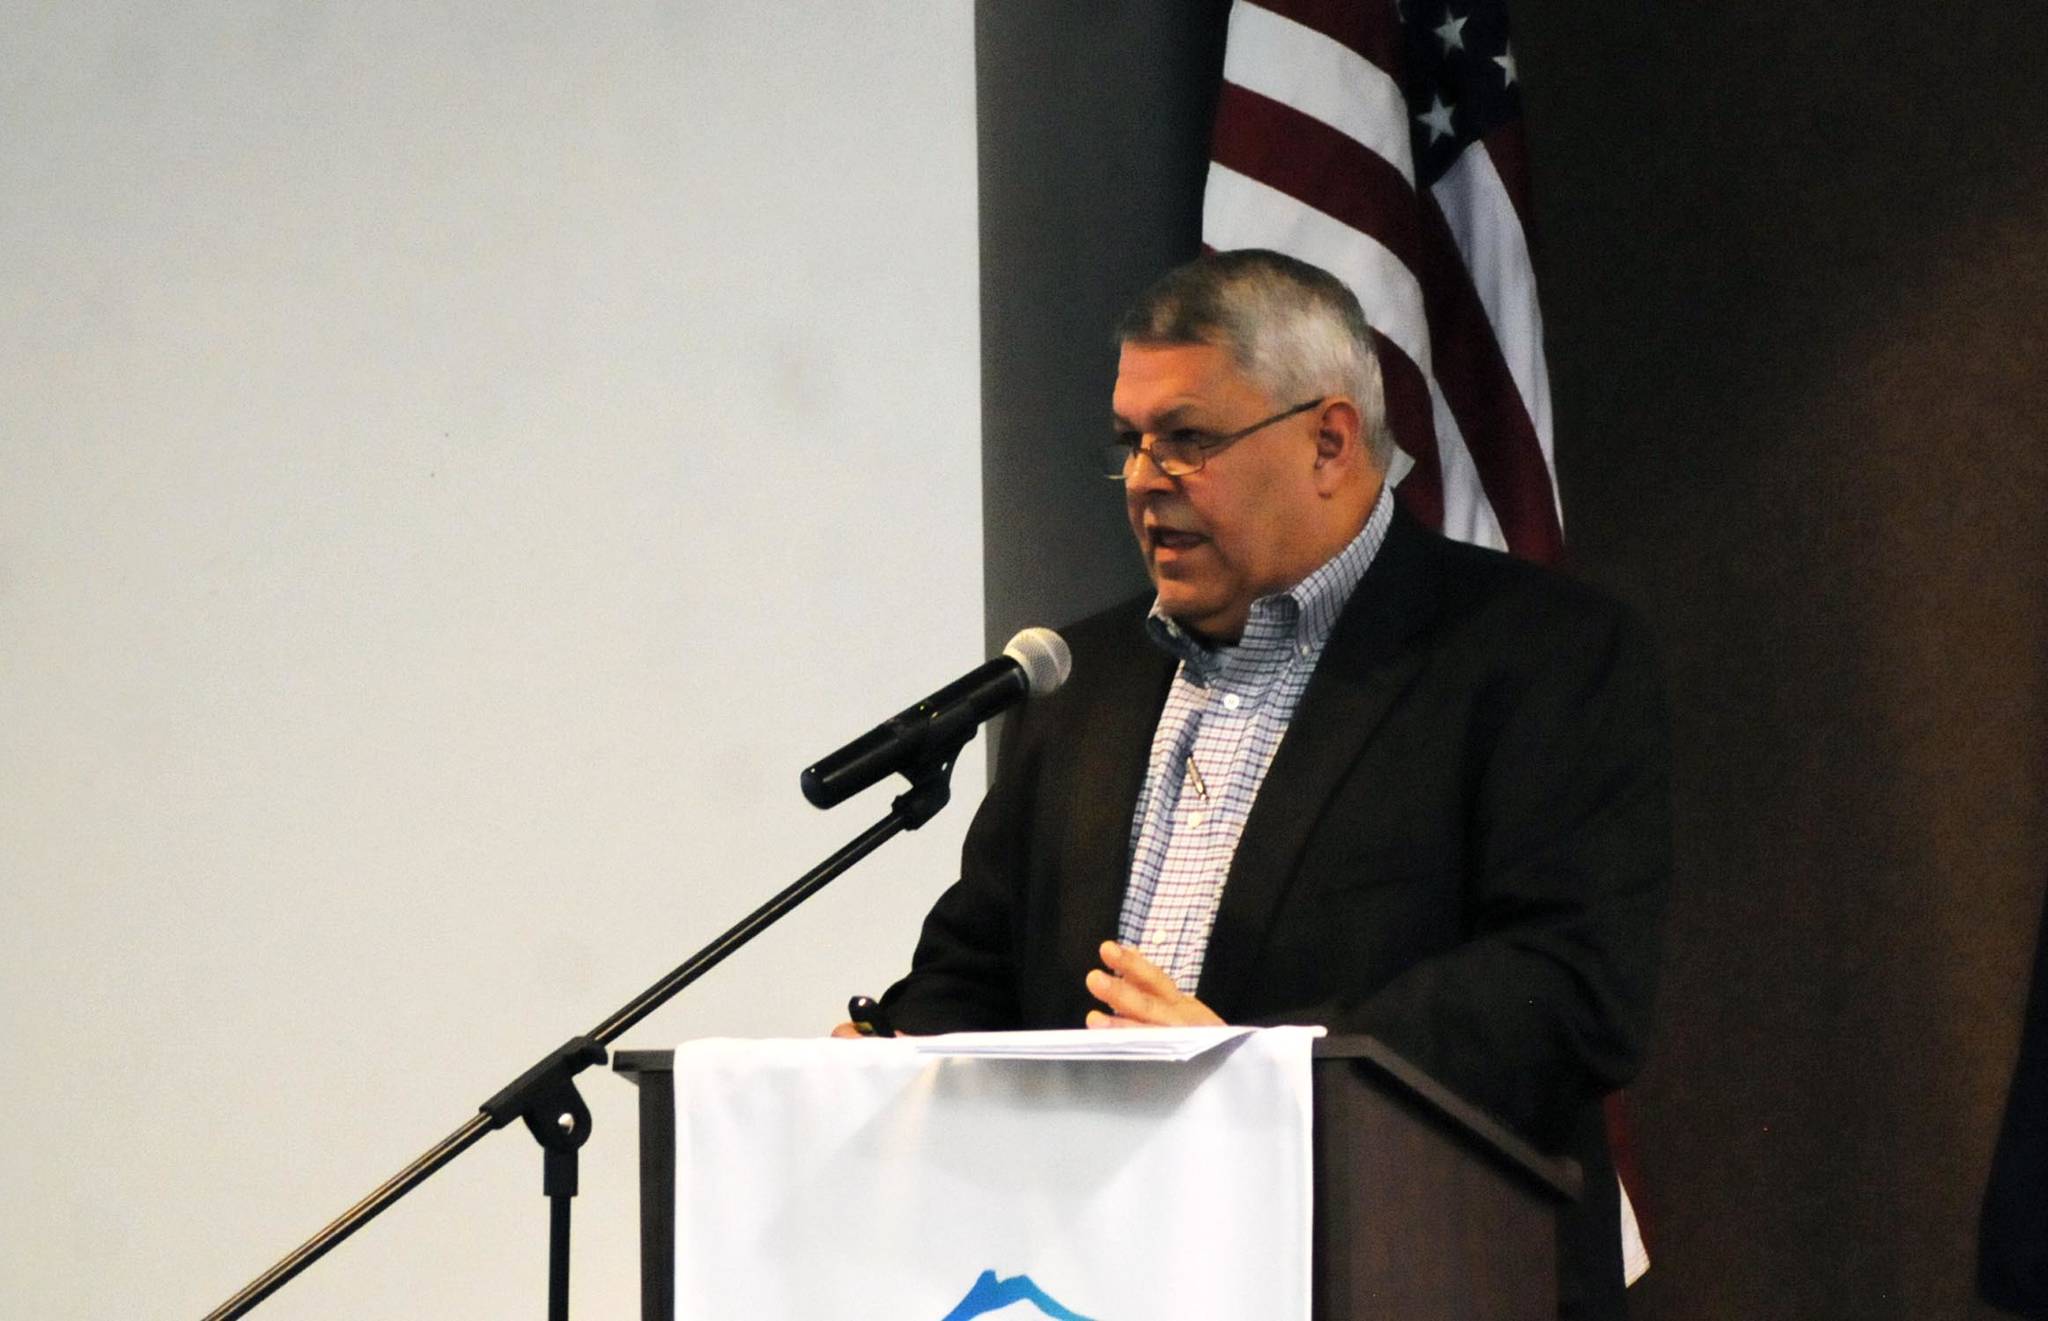 Borough Mayor Charlie Pierce speaks to the attendees at a joint luncheon of the Kenai and Soldotna chambers of commerce Wednesday, Feb. 7, 2018 in Kenai, Alaska. Pierce says he plans to fix the borough’s approximately $4 million deficit in the fiscal year 2019 budget without raising taxes or implementing new ones. (Photo by Elizabeth Earl/Peninsula Clarion)